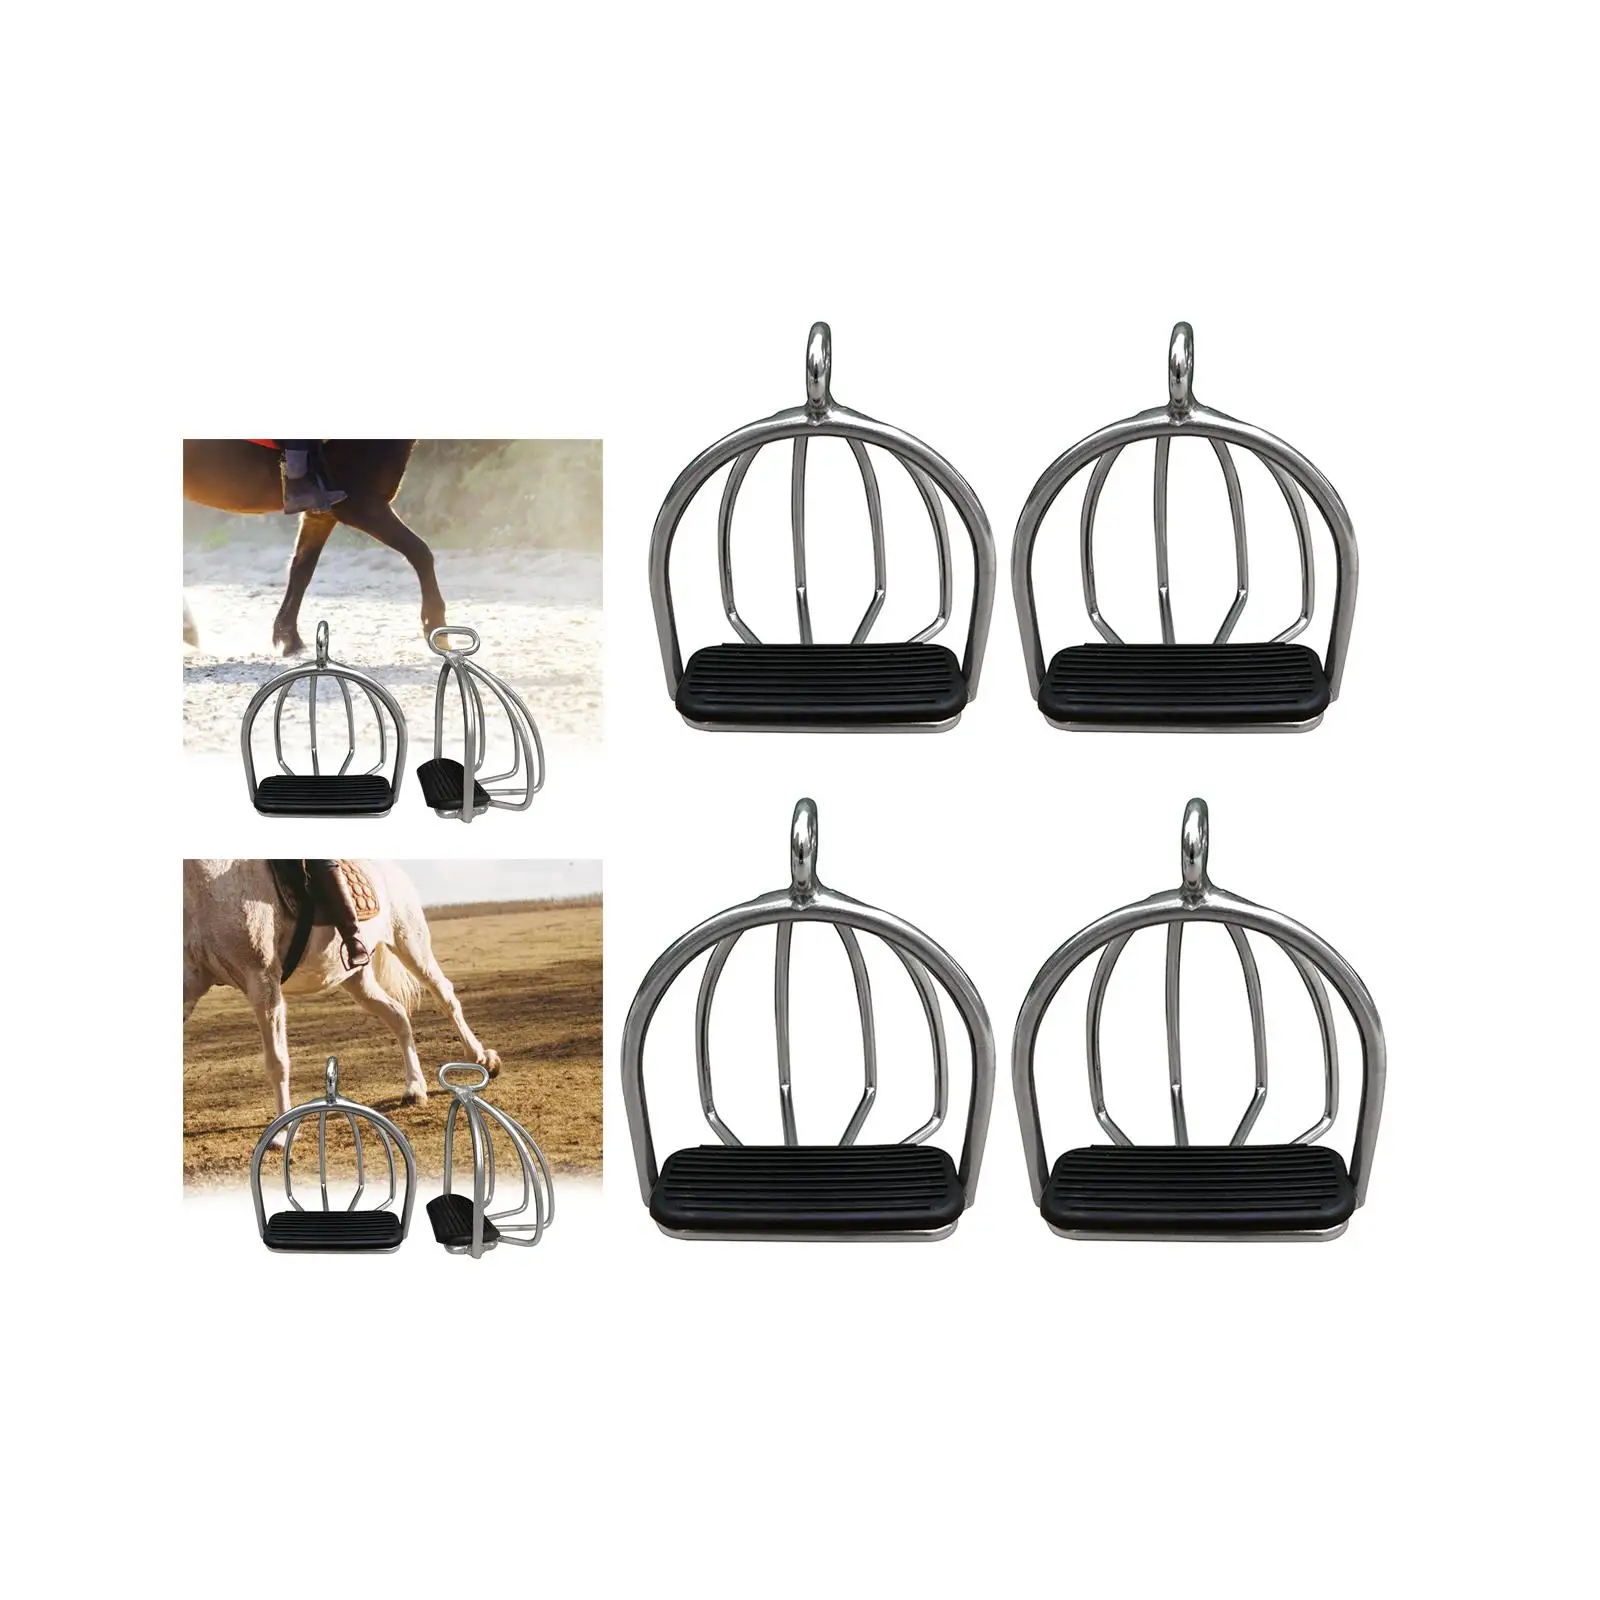 1Pair Horse Riding Stirrups Training Tool High Strength Flexible Equestrian Sports Steel for Safety Horse Riding Accessories